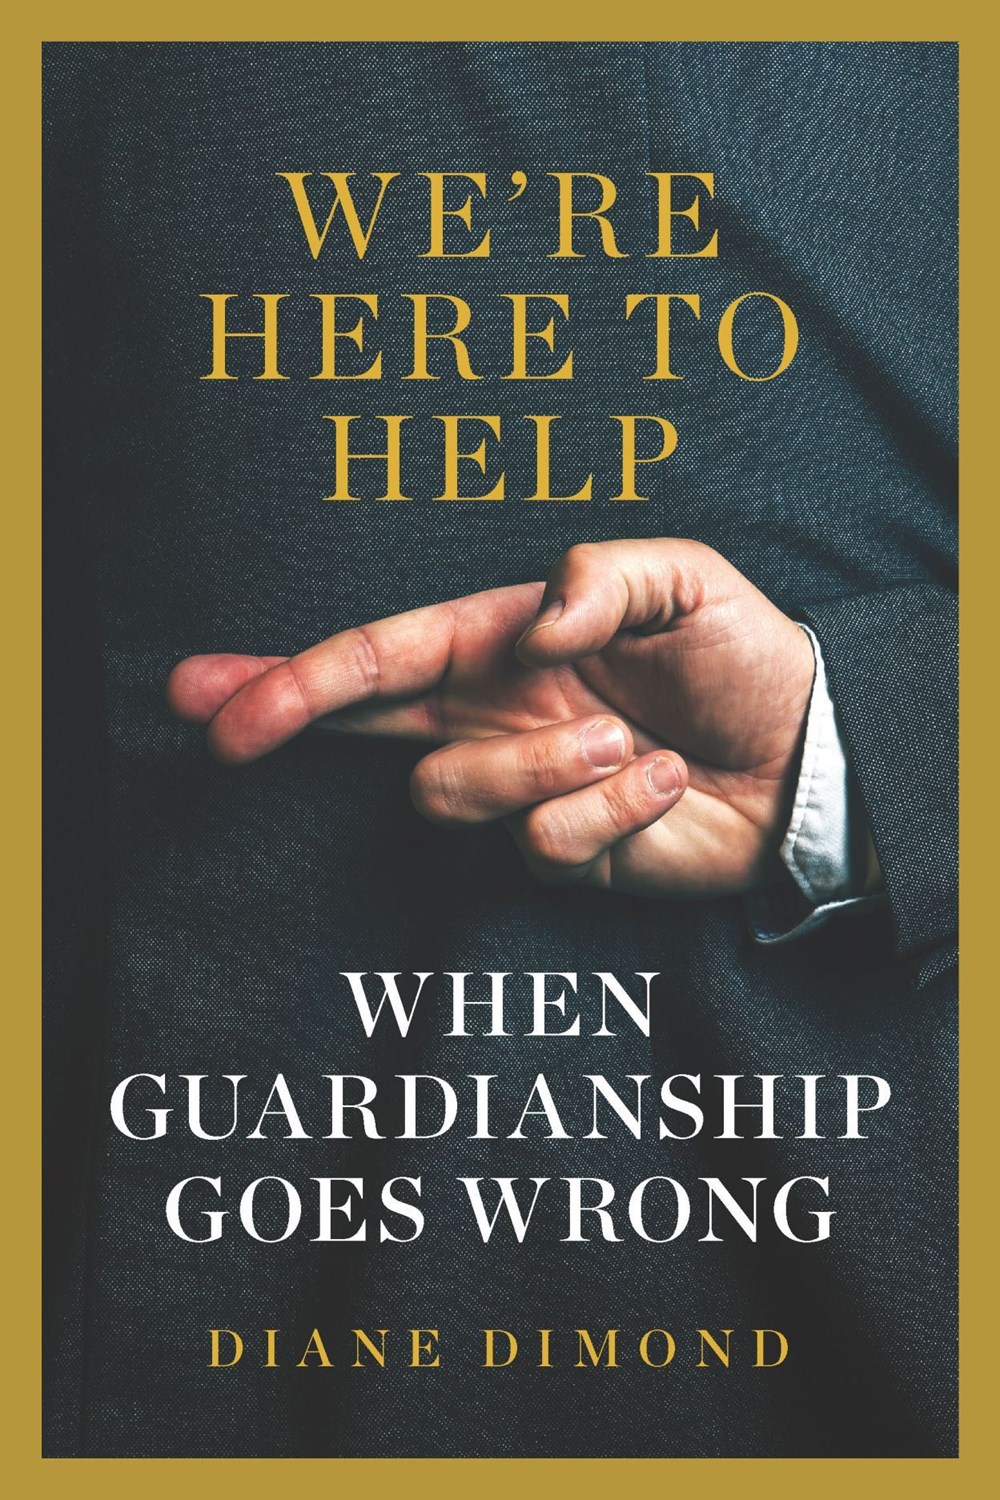 We’re Here To Help: When Guardianship Goes Wrong